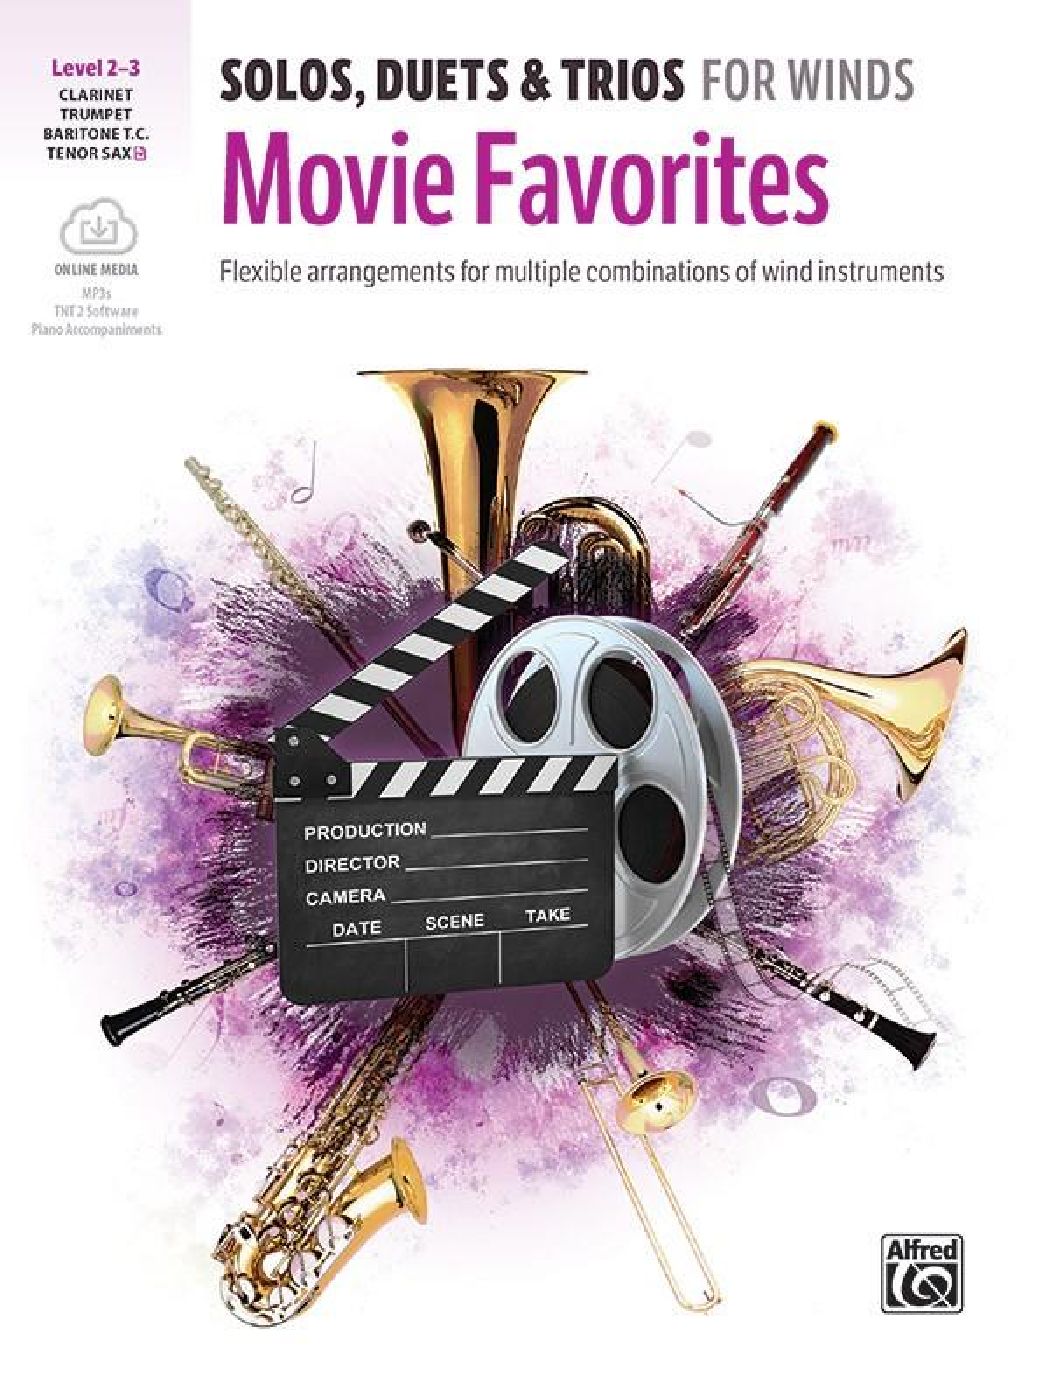 ALFRED PUBLISHING SOLOS, DUETS AND TRIOS FOR WINDS: MOVIE FAVORITES